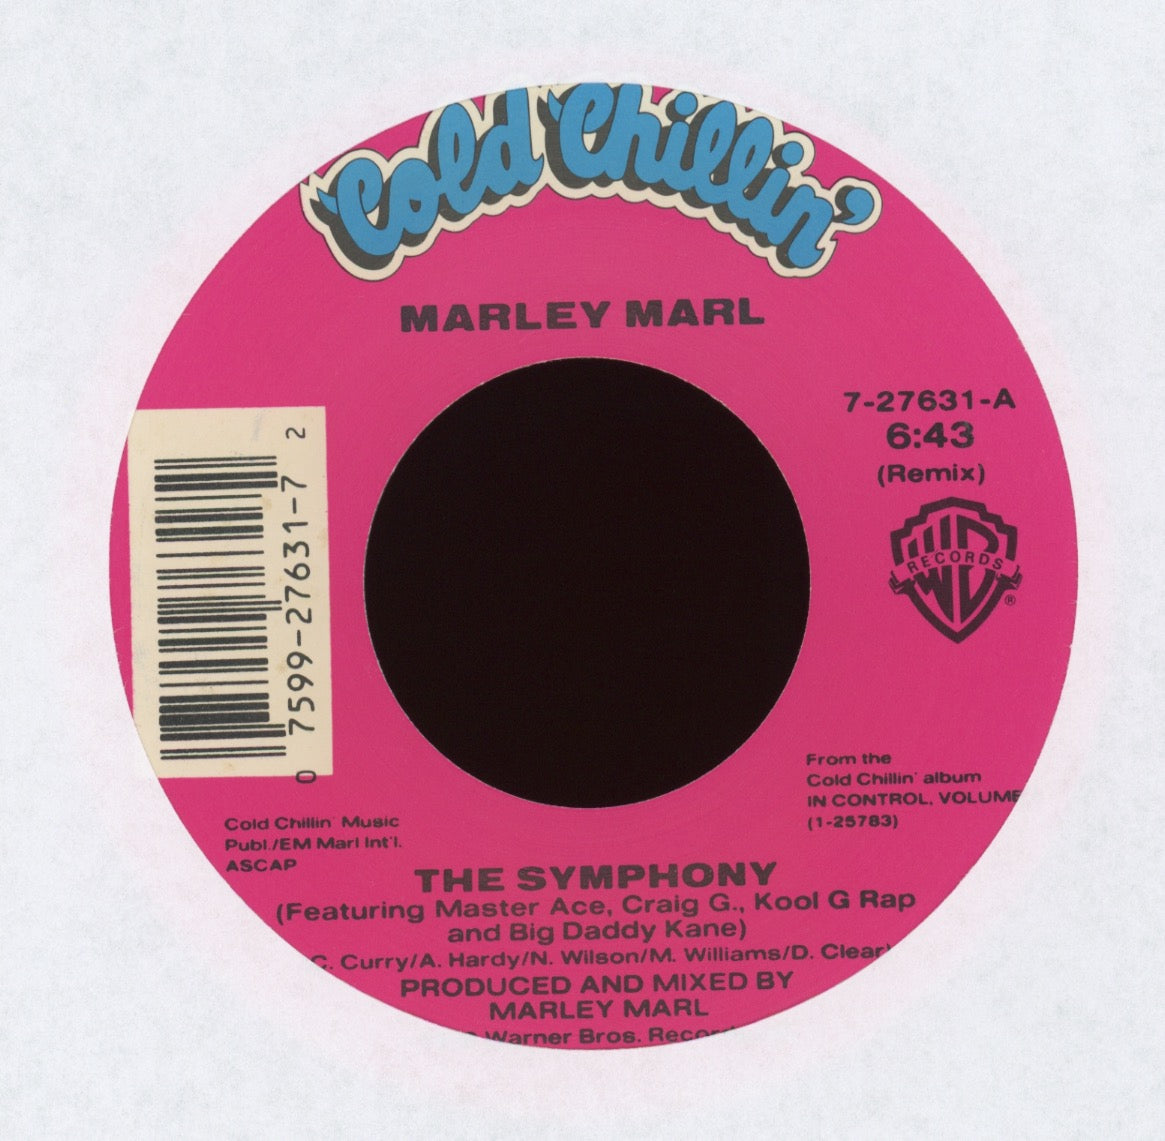 Marley Marl - The Symphony on Cold Chillin'